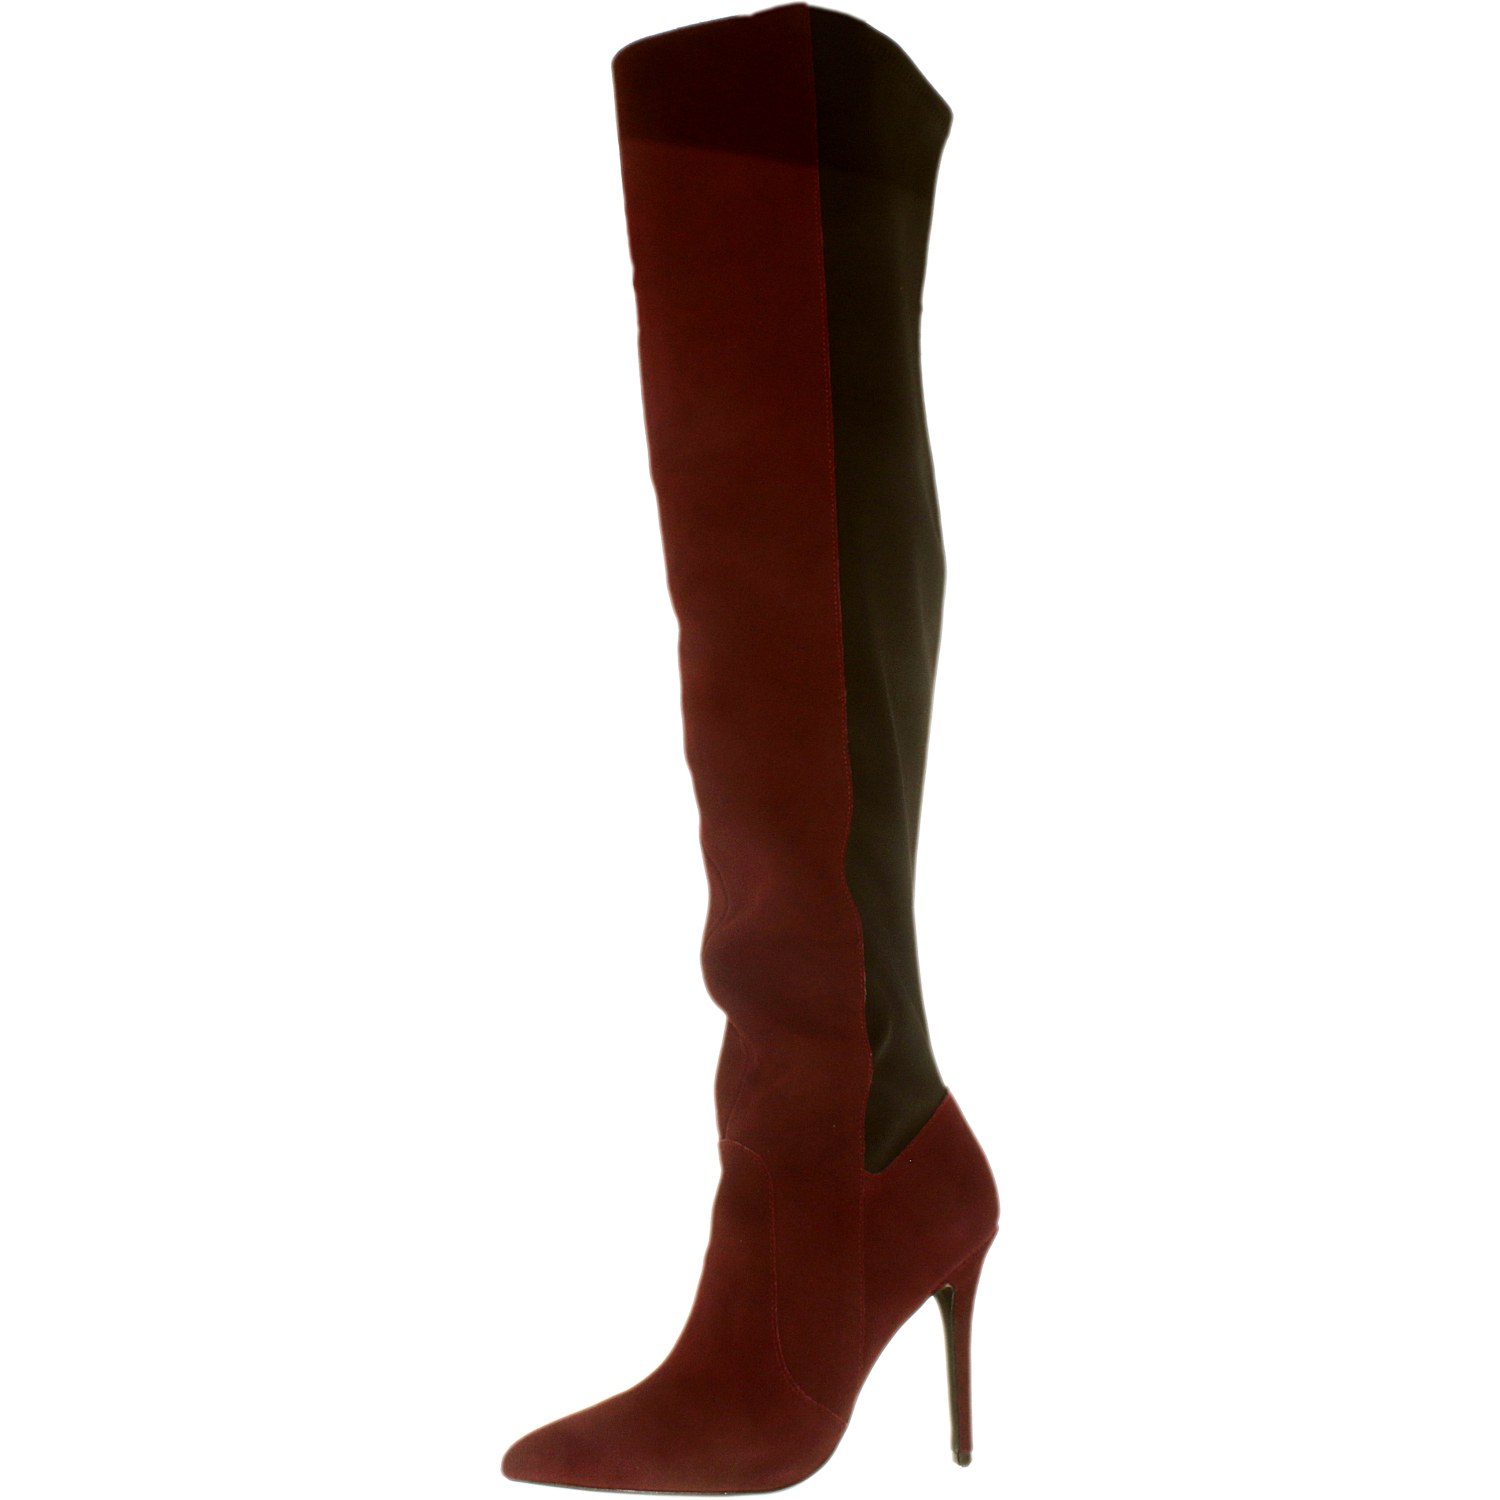 Charles by Charles David Charles By David Women's Paso Suede/Lycra Merlot/Black Above the Knee Leather Boot - 6.5M